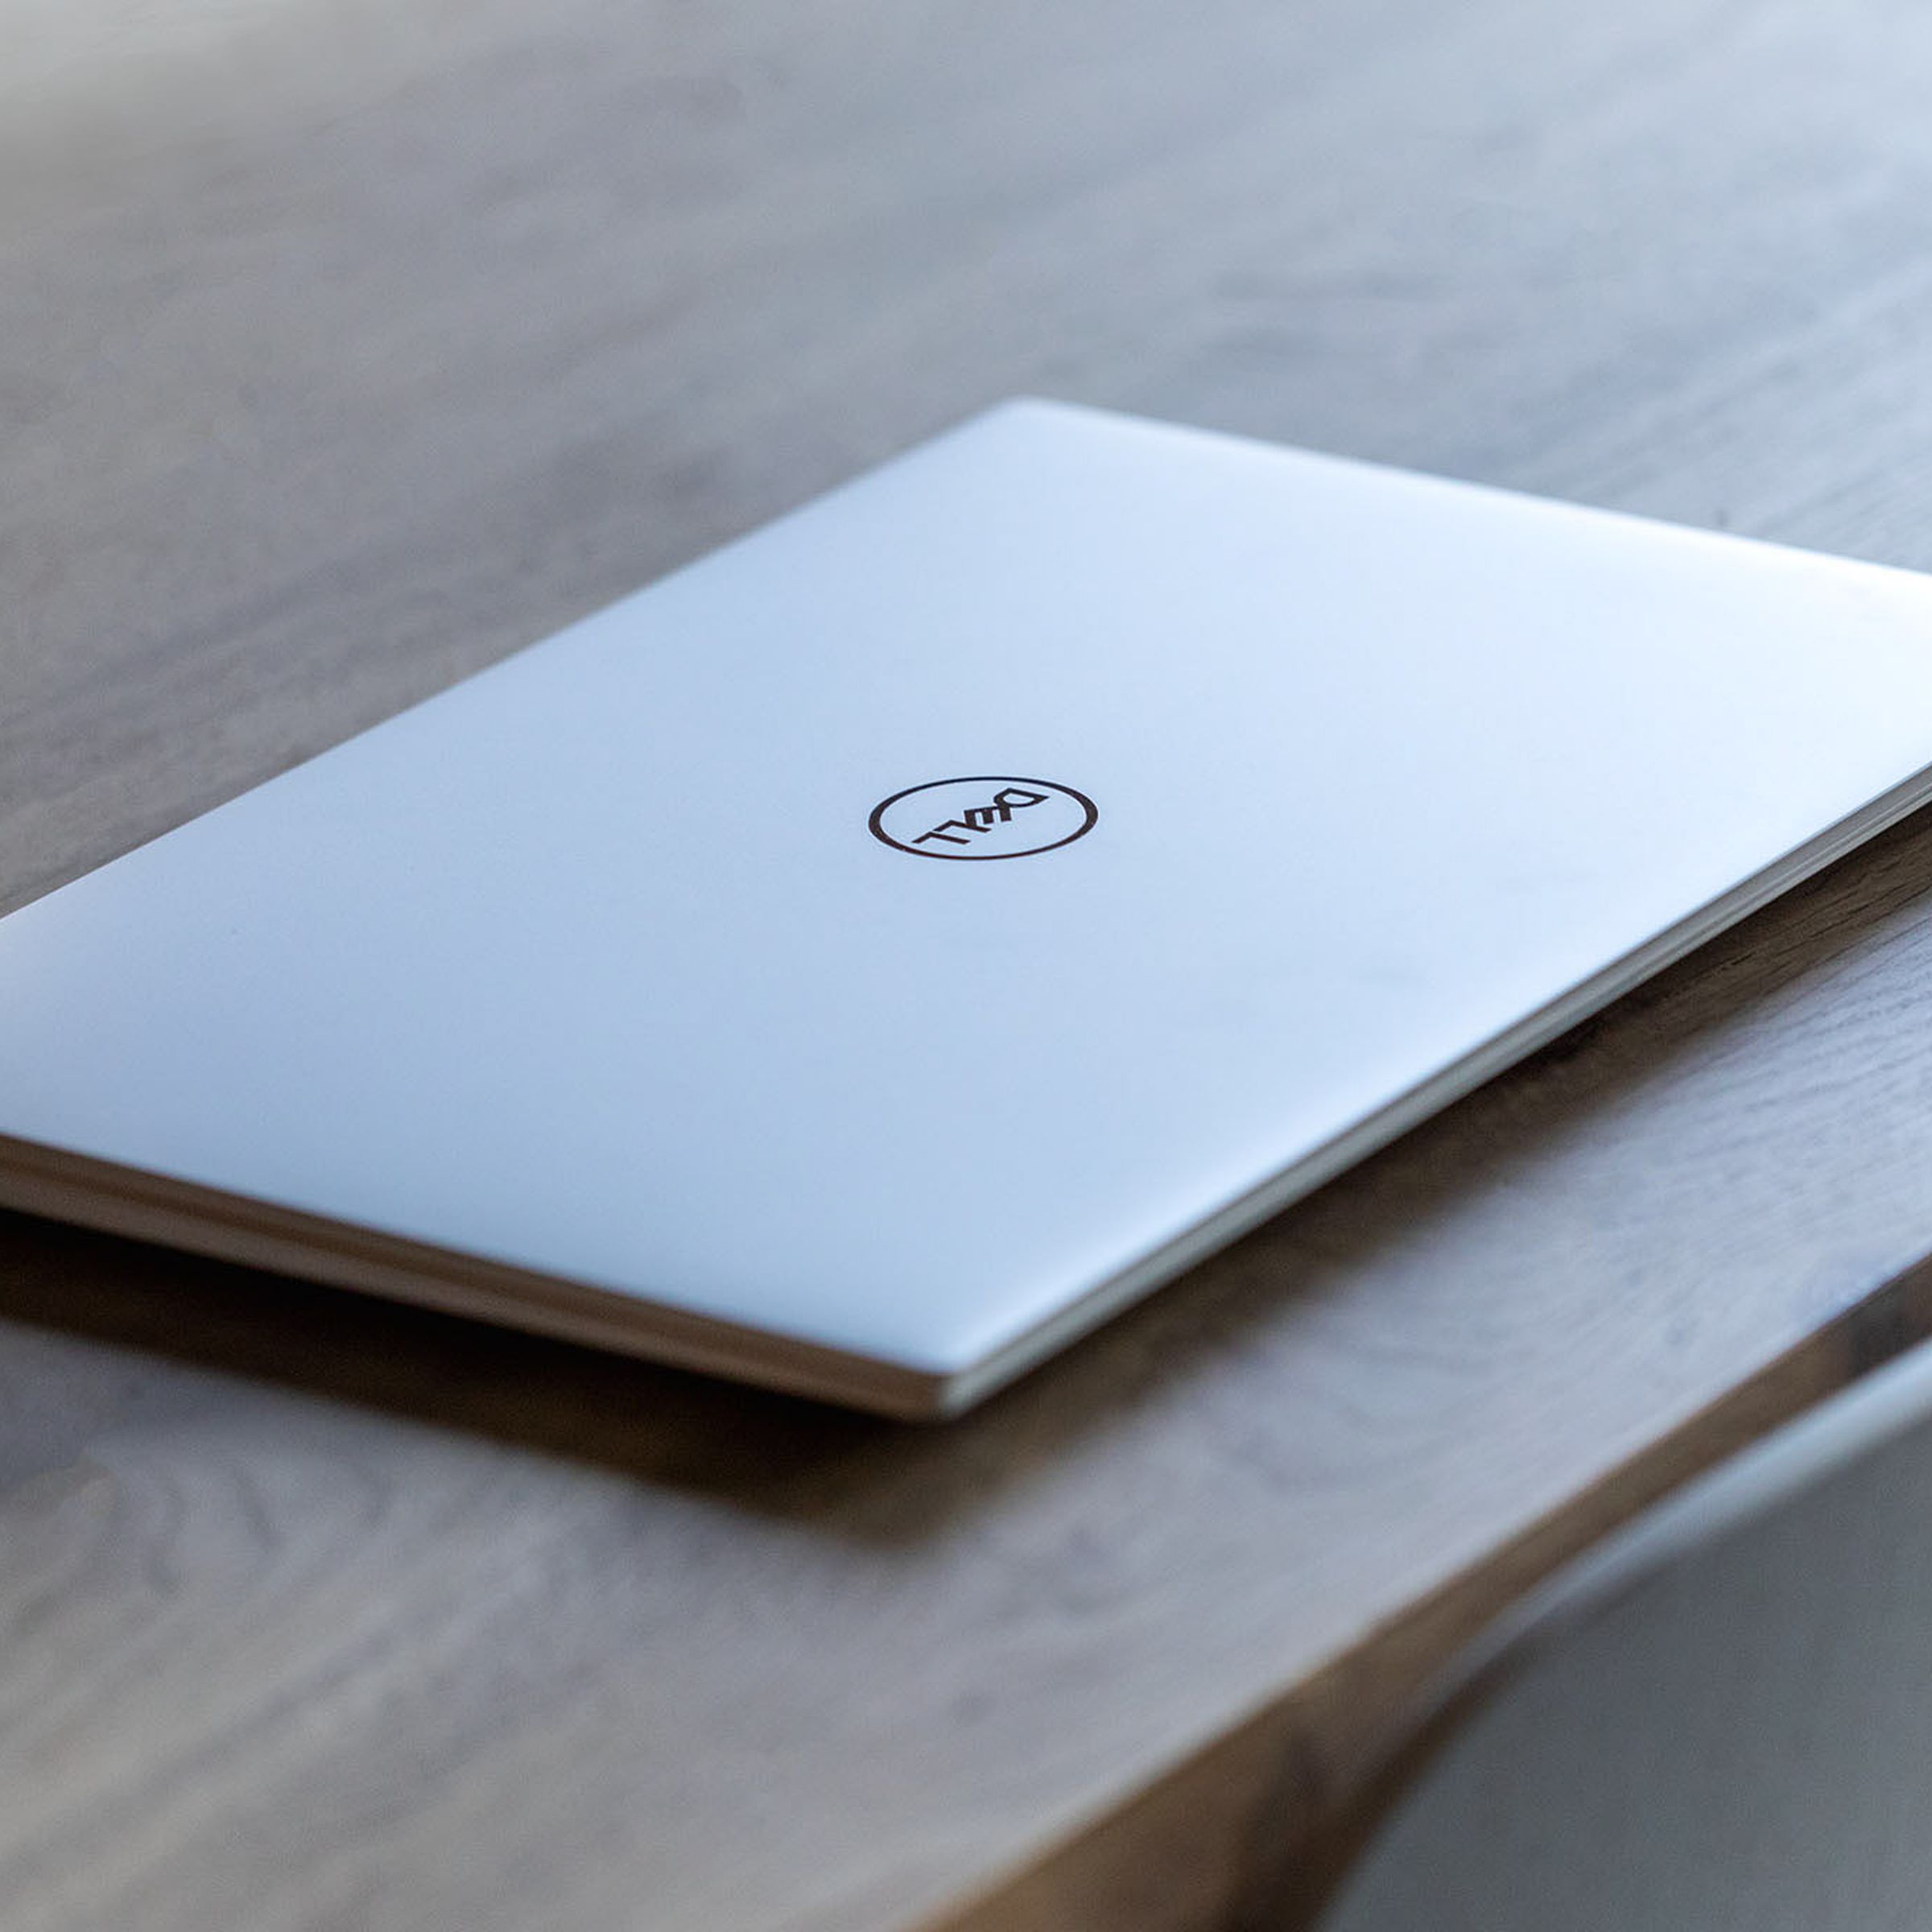 The Dell XPS 15 closed on a wooden table.